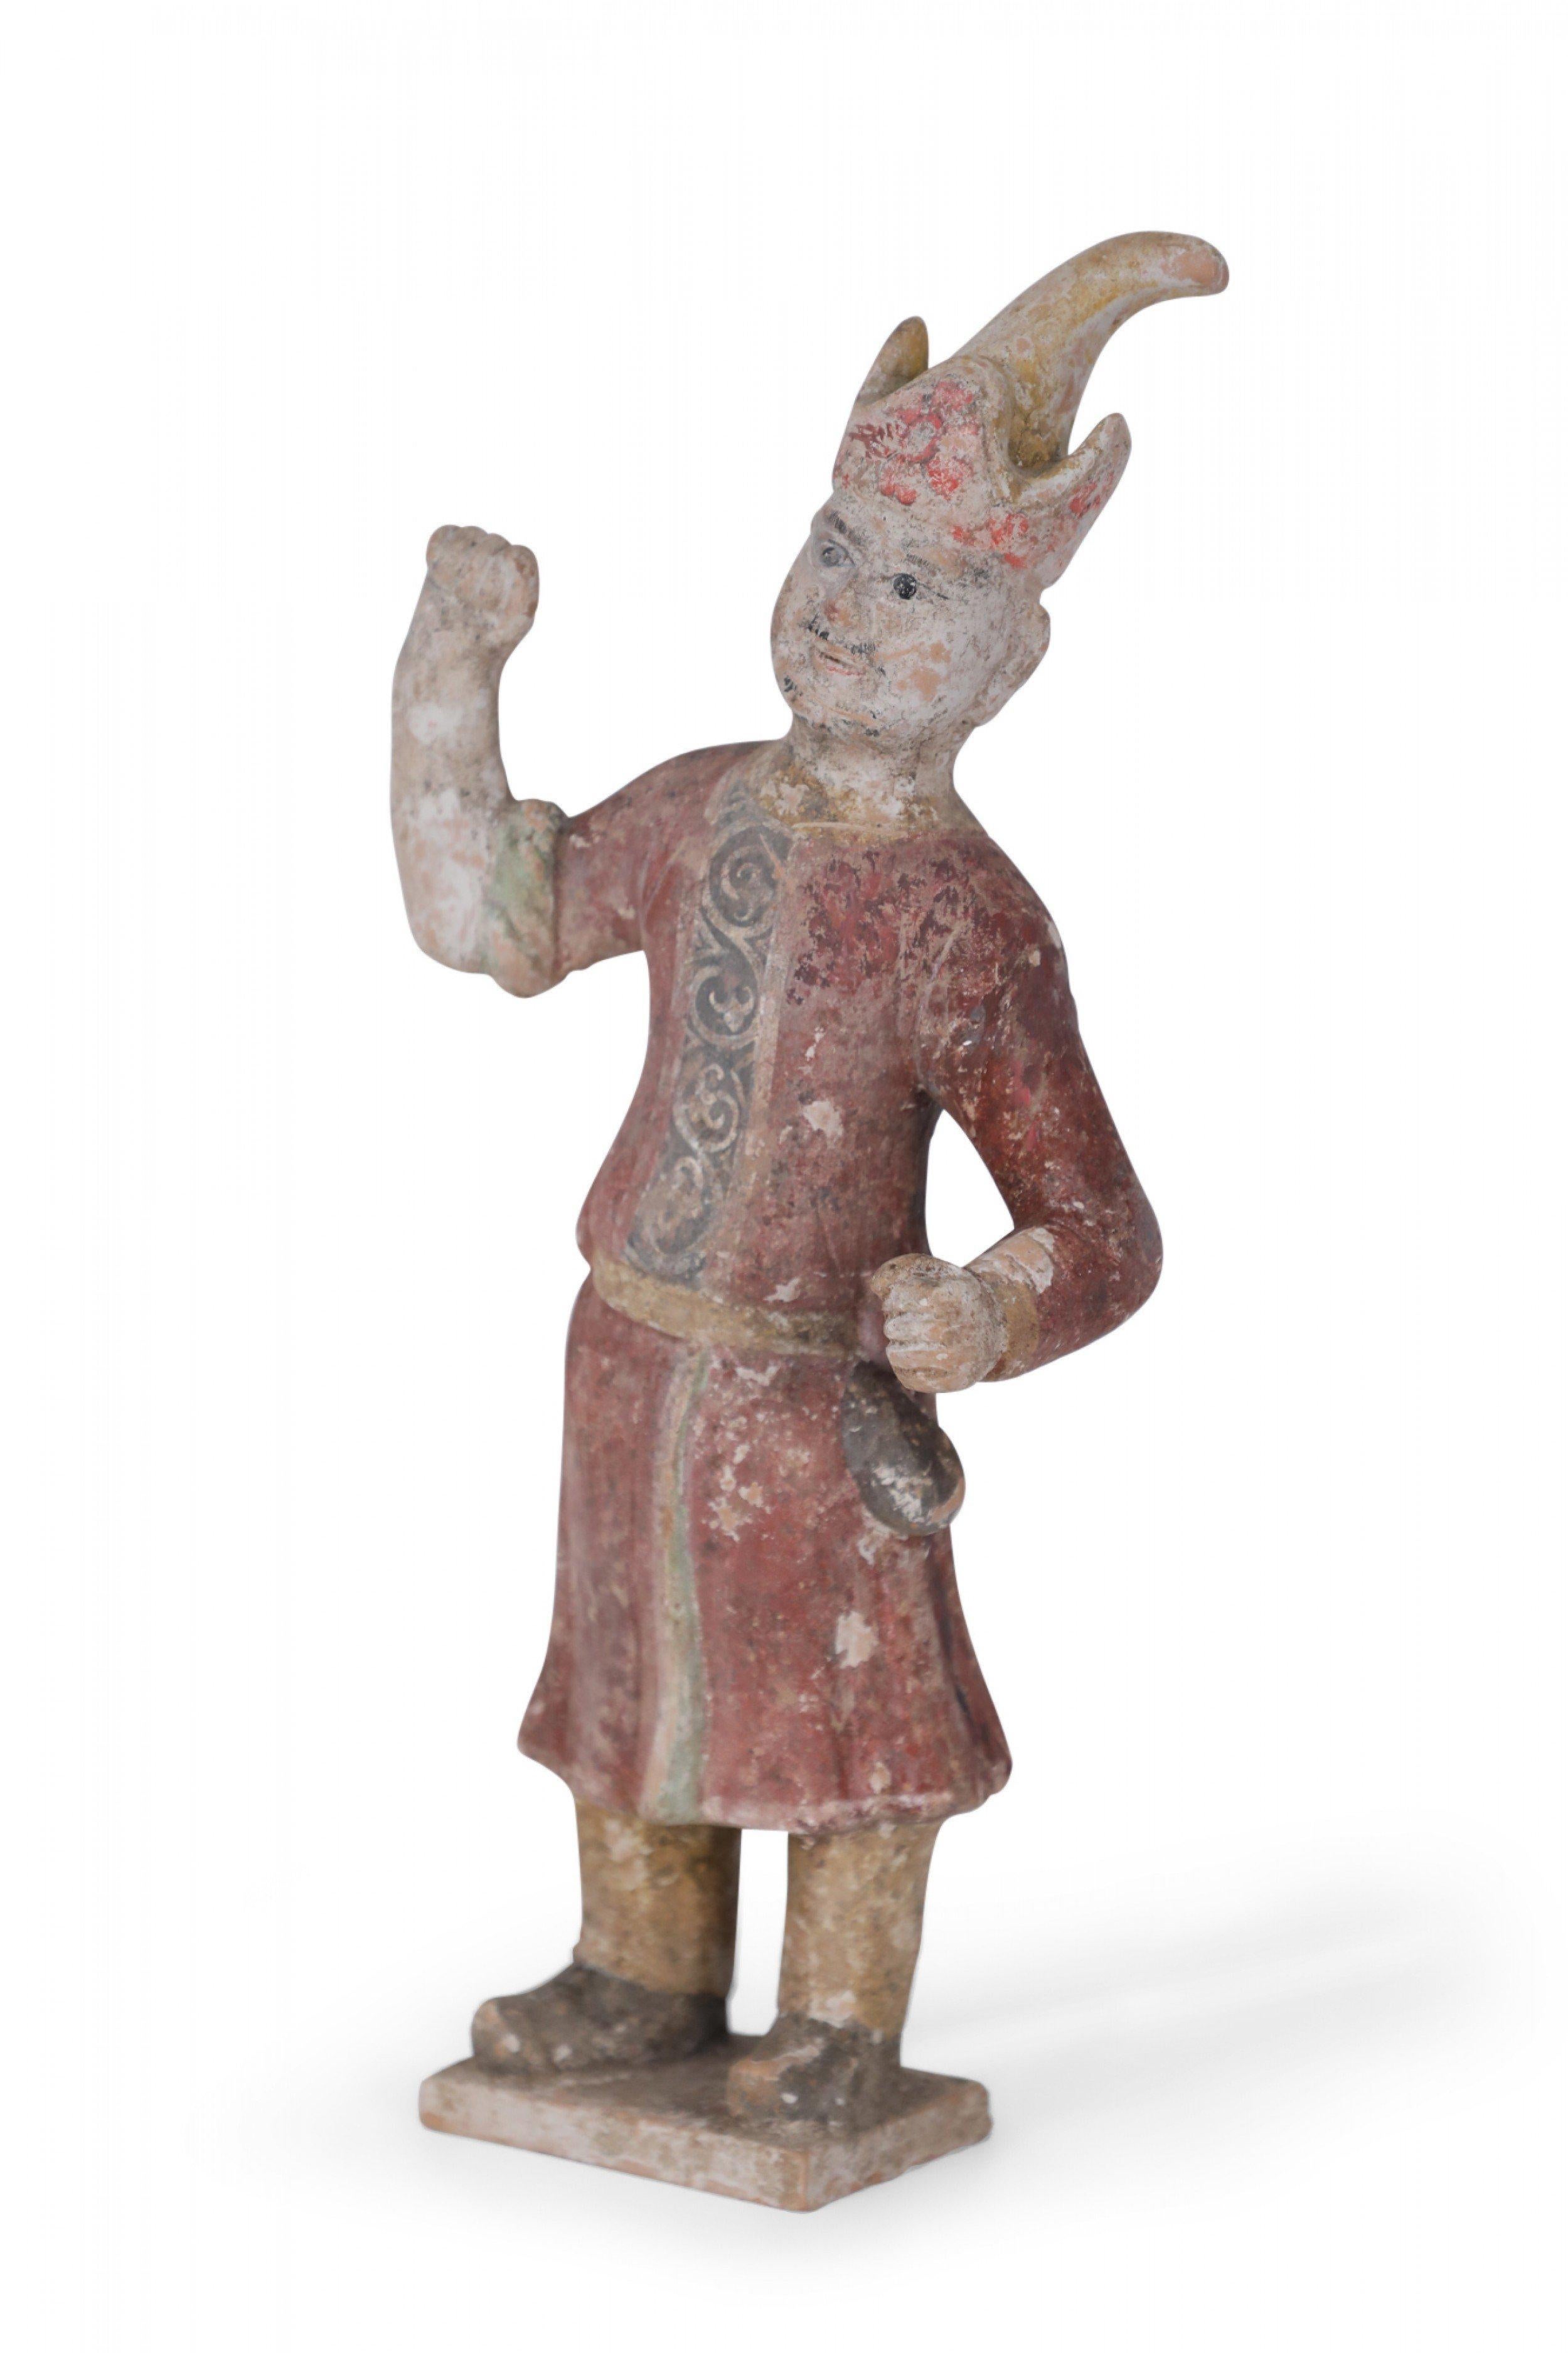 Antique Chinese Tang Dynasty-style terra cotta tomb figure of a Huren (northern tribesmen) man dressed in red robes and a prominent hat, with one fist raised in the air.
 